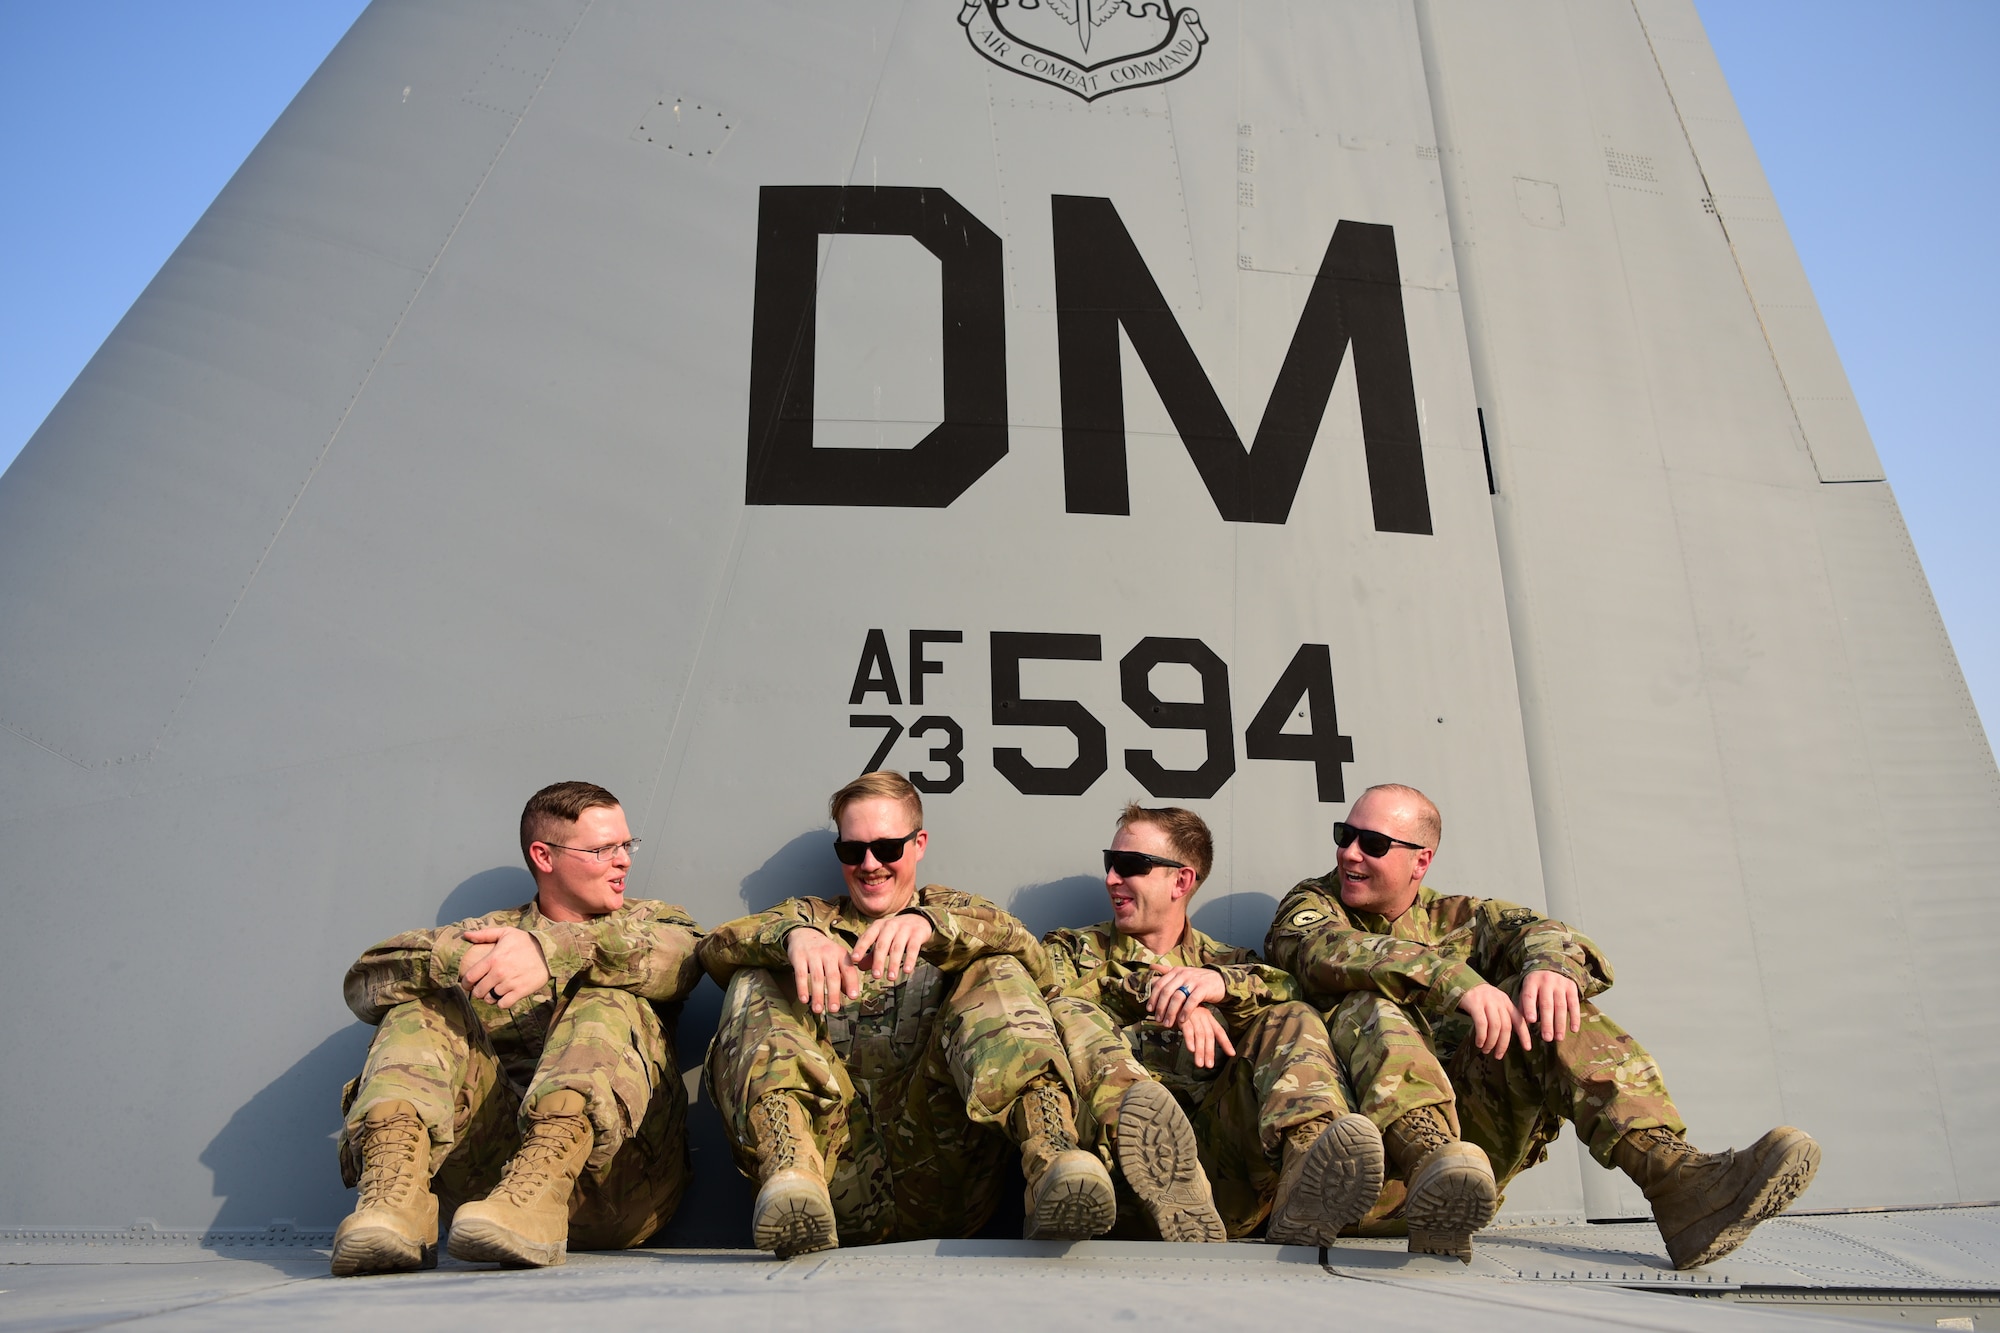 Maintainers from the 386th Expeditionary Aircraft Maintenance Squadron sit on the back of a 43rd Expeditionary Electronic Combat Squadron EC-130H aircraft Sept. 21, 2018, at an undisclosed location in Southwest Asia. The 43rd EECS and aircraft they fly provide communications jamming support to United States and coalition ground forces throughout the Central Command area of responsibility. (U.S. Air Force photo by Staff Sgt. Christopher Stoltz)